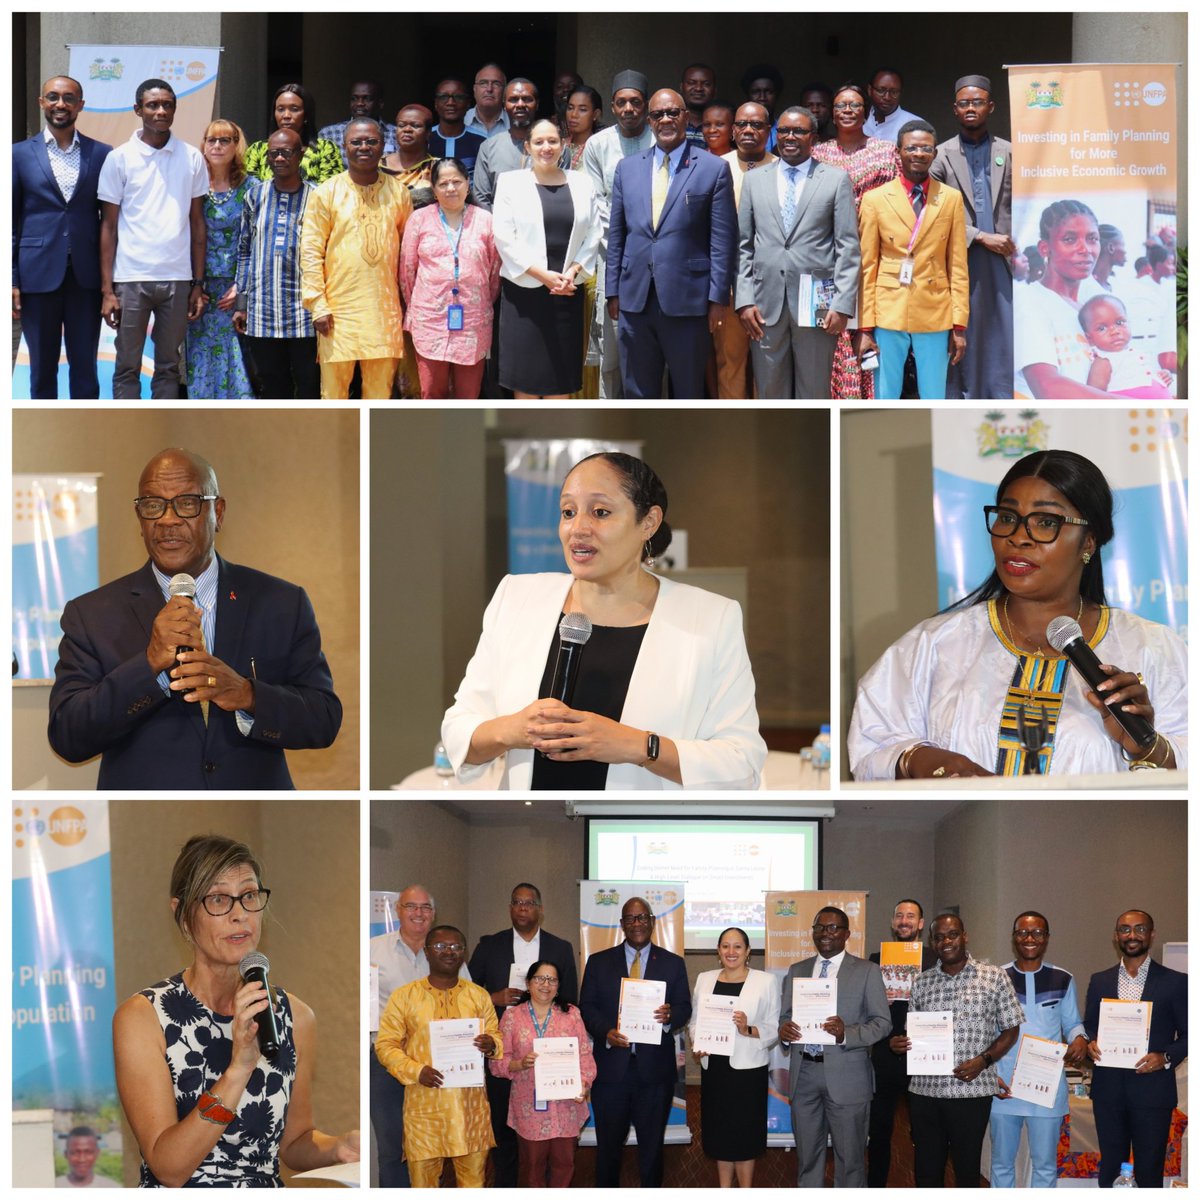 Today, Ministry of Health & @UNFPA launched an Investment Case for #FamilyPlanning at a high-level dialogue led by our Rep @NadiaRashd & Ministers @DembyAustin & @IsataMahoi.🙏🏿 to @UKinSierraLeone, @WHO, @UNAIDS, @IMF, @WorldBank, @UNICEF & partners for a captivating dialogue.